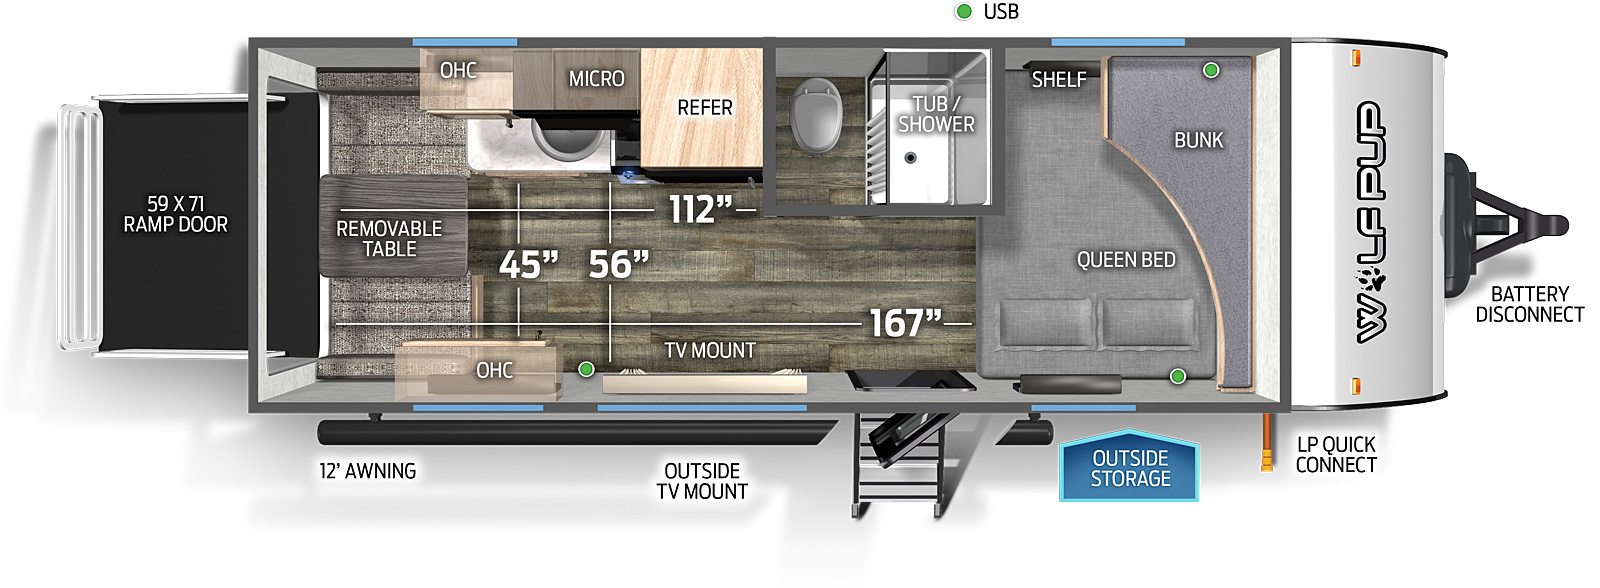 The 18RJBBL has no slide outs and one entry door. Exterior features include a rear ramp door, 12 foot awning, outside TV mount, outside storage, LP quick connect, and battery disconnect. Interior layout front to back: front queen bed with shelf, and bunk above; off-door side aisle bathroom with only a toilet and tub/shower; off-door side refrigerator, microwave, overhead cabinets, cook top stove, and kitchen countertop with sink; door side TV mount and overhead cabinet; rear removable table and seats. Cargo area dimensions: 167 inches from the rear to the queen bed, 112 inches from the rear to the bathroom wall, 45 inches between kitchen countertop and door side overhead cabinet, 56 inches between kitchen countertop and door side wall, and 59x71 inch rear ramp door.